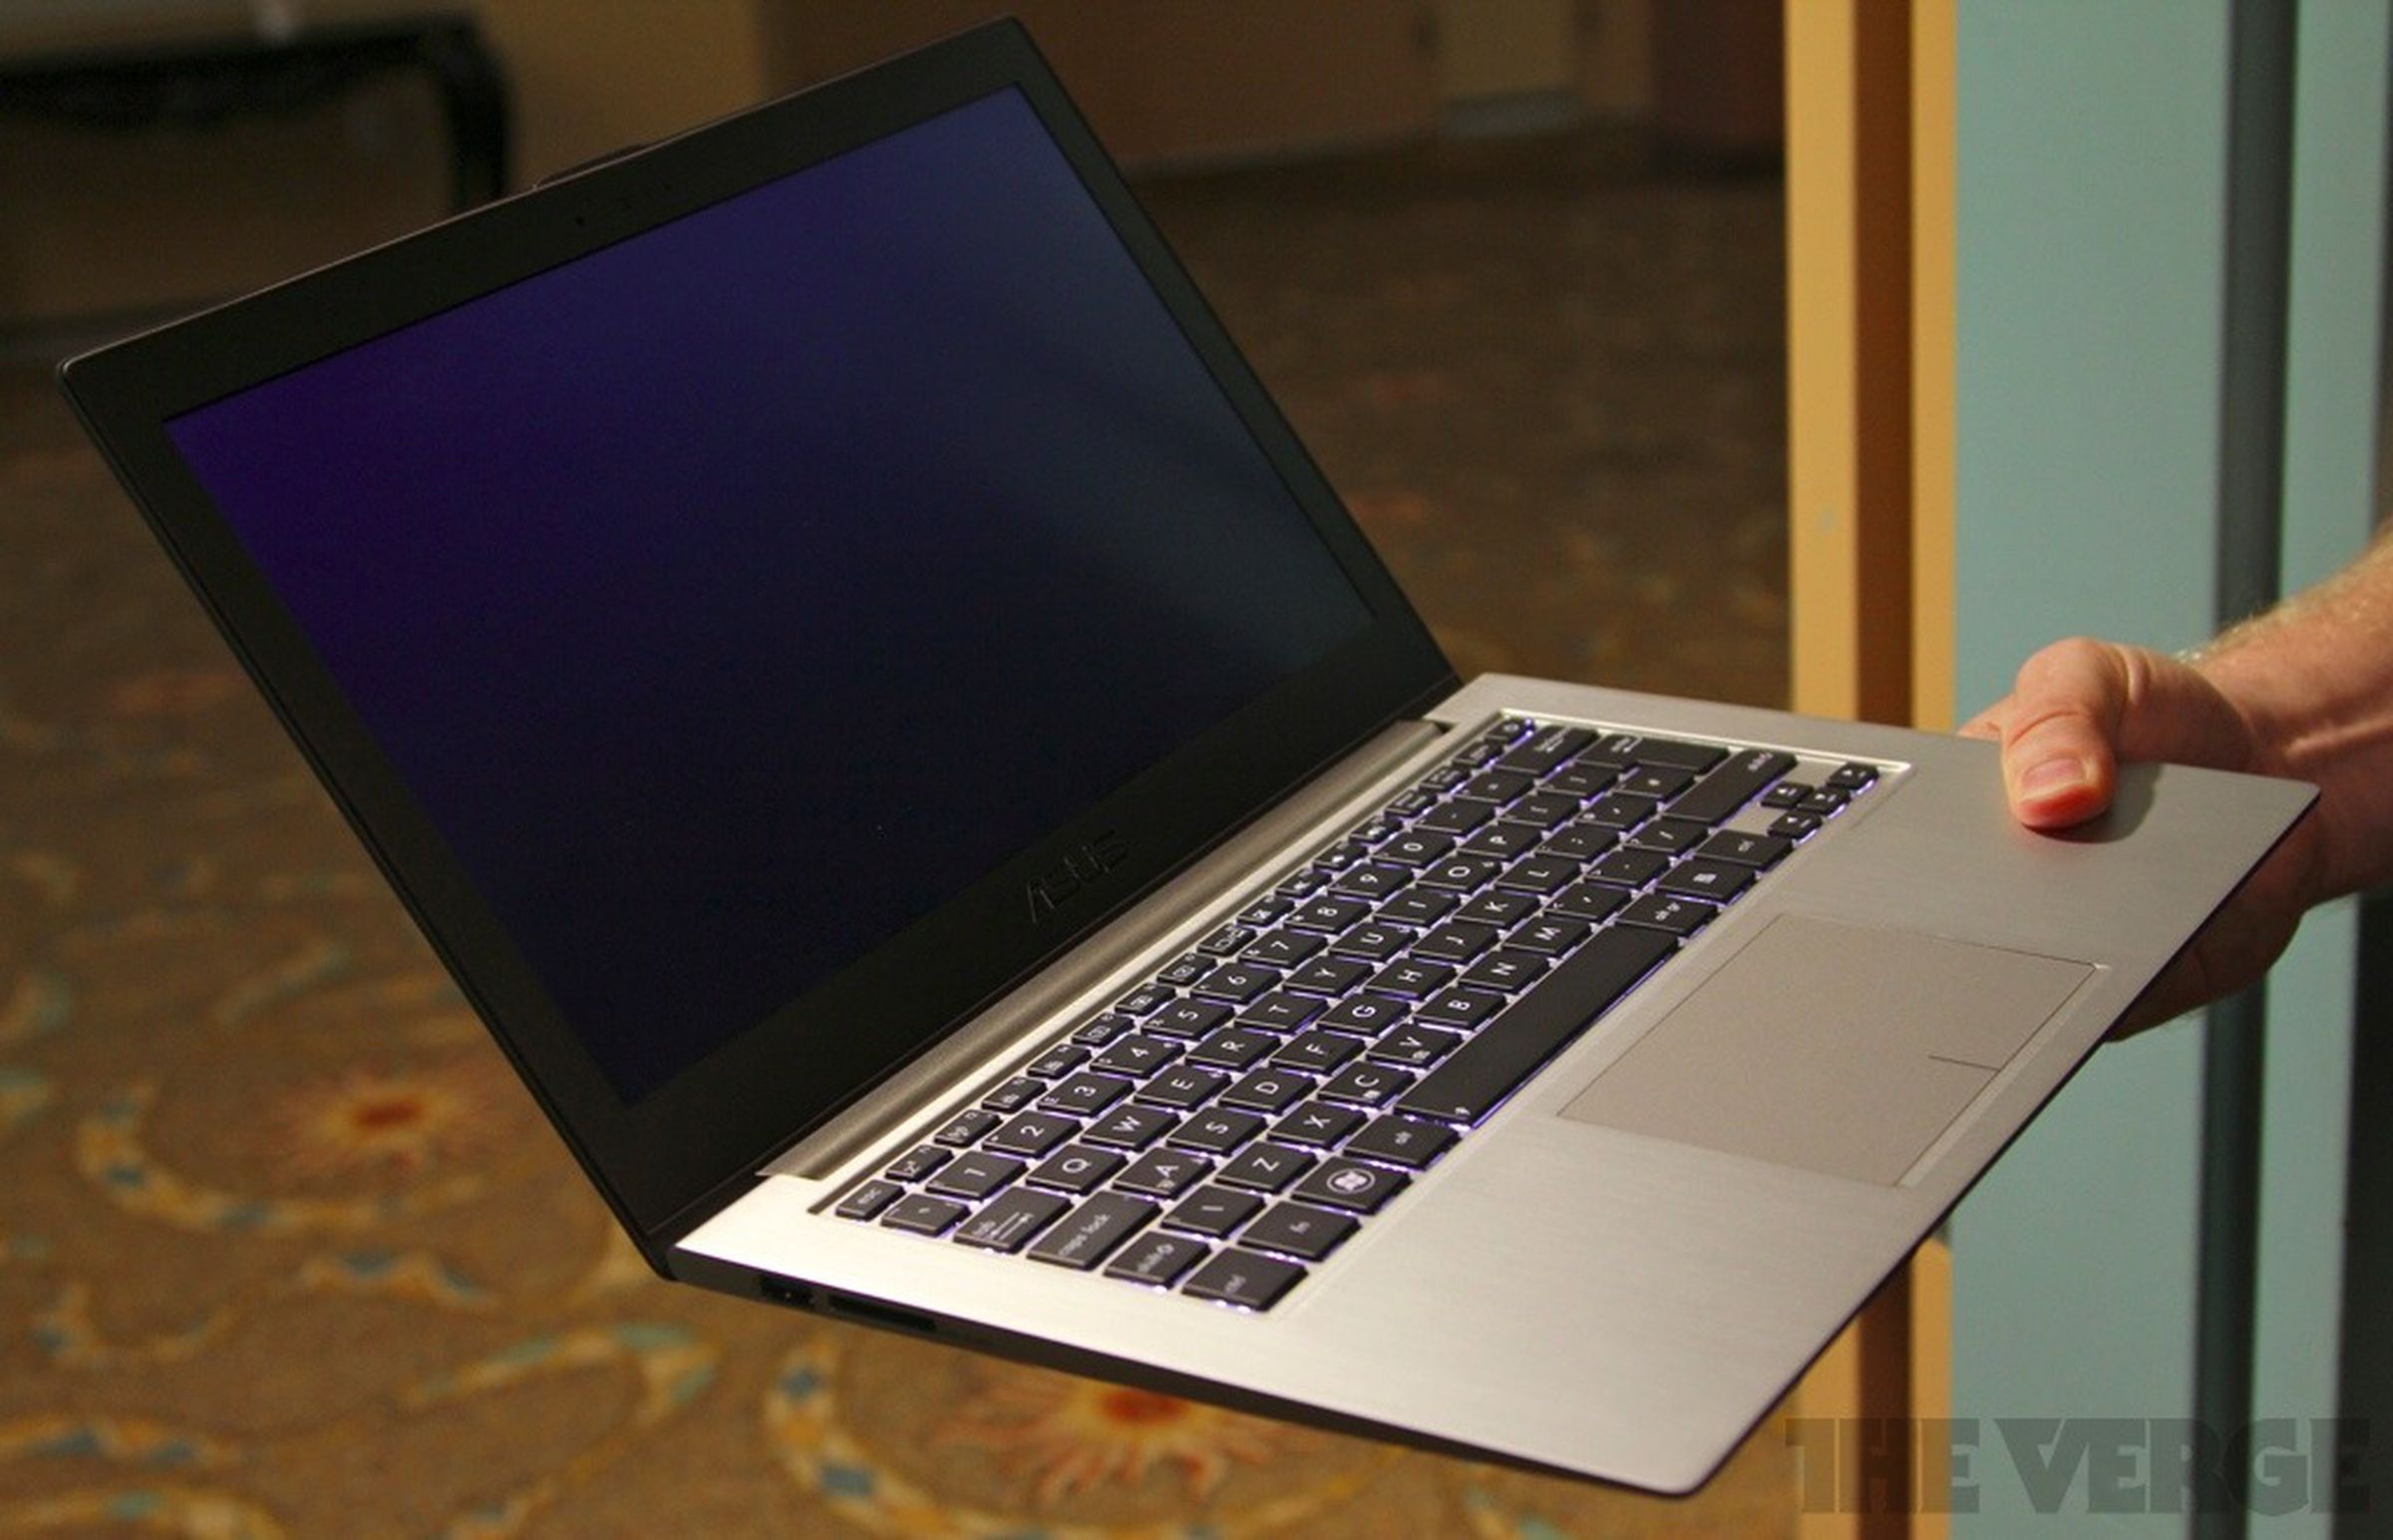 Asus Zenbook Prime UX32VD hands-on pictures